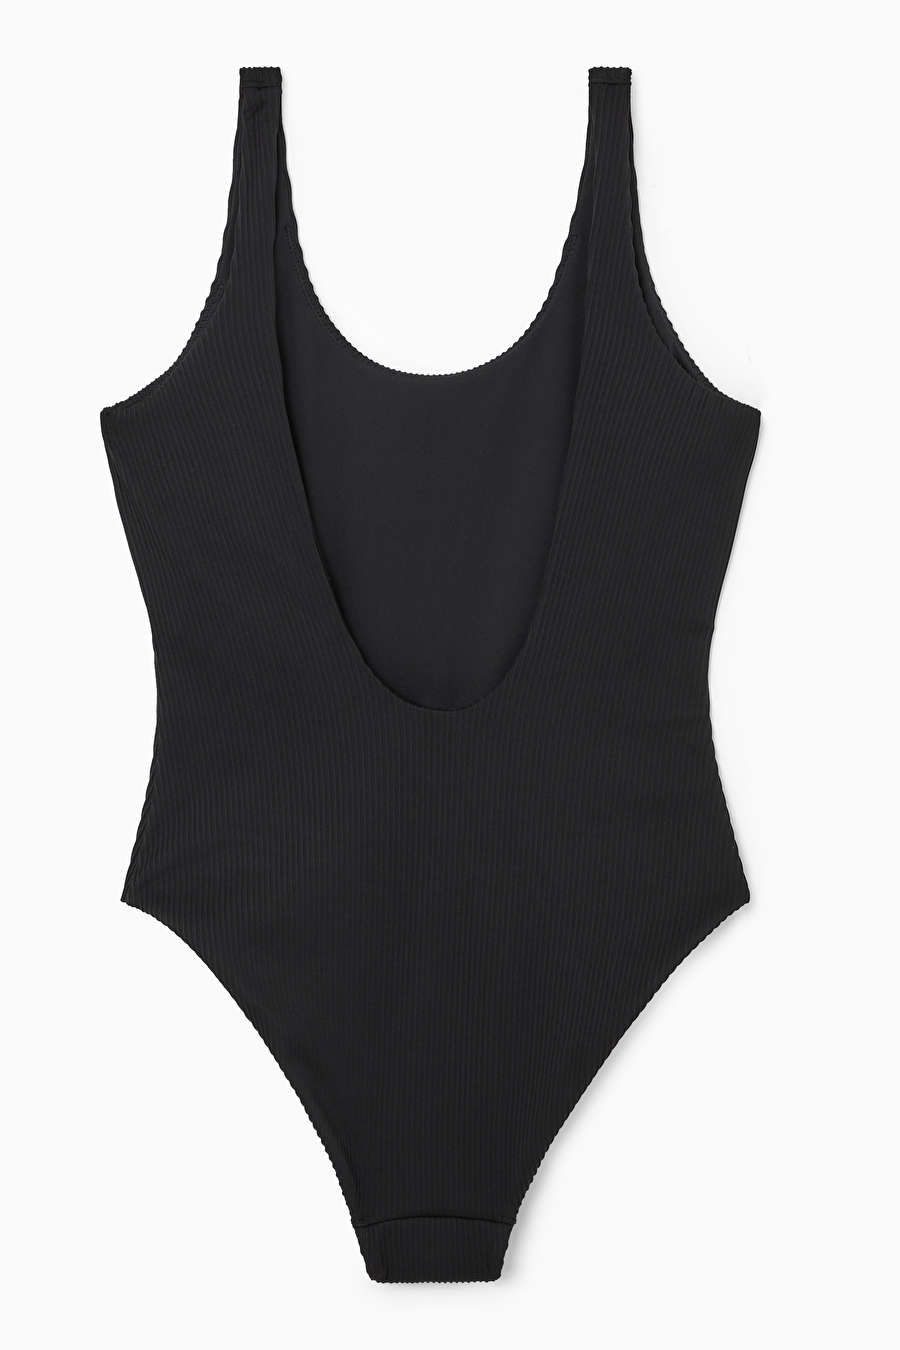 SCOOP-NECK RIBBED SWIMSUIT - BLACK - COS | COS UK